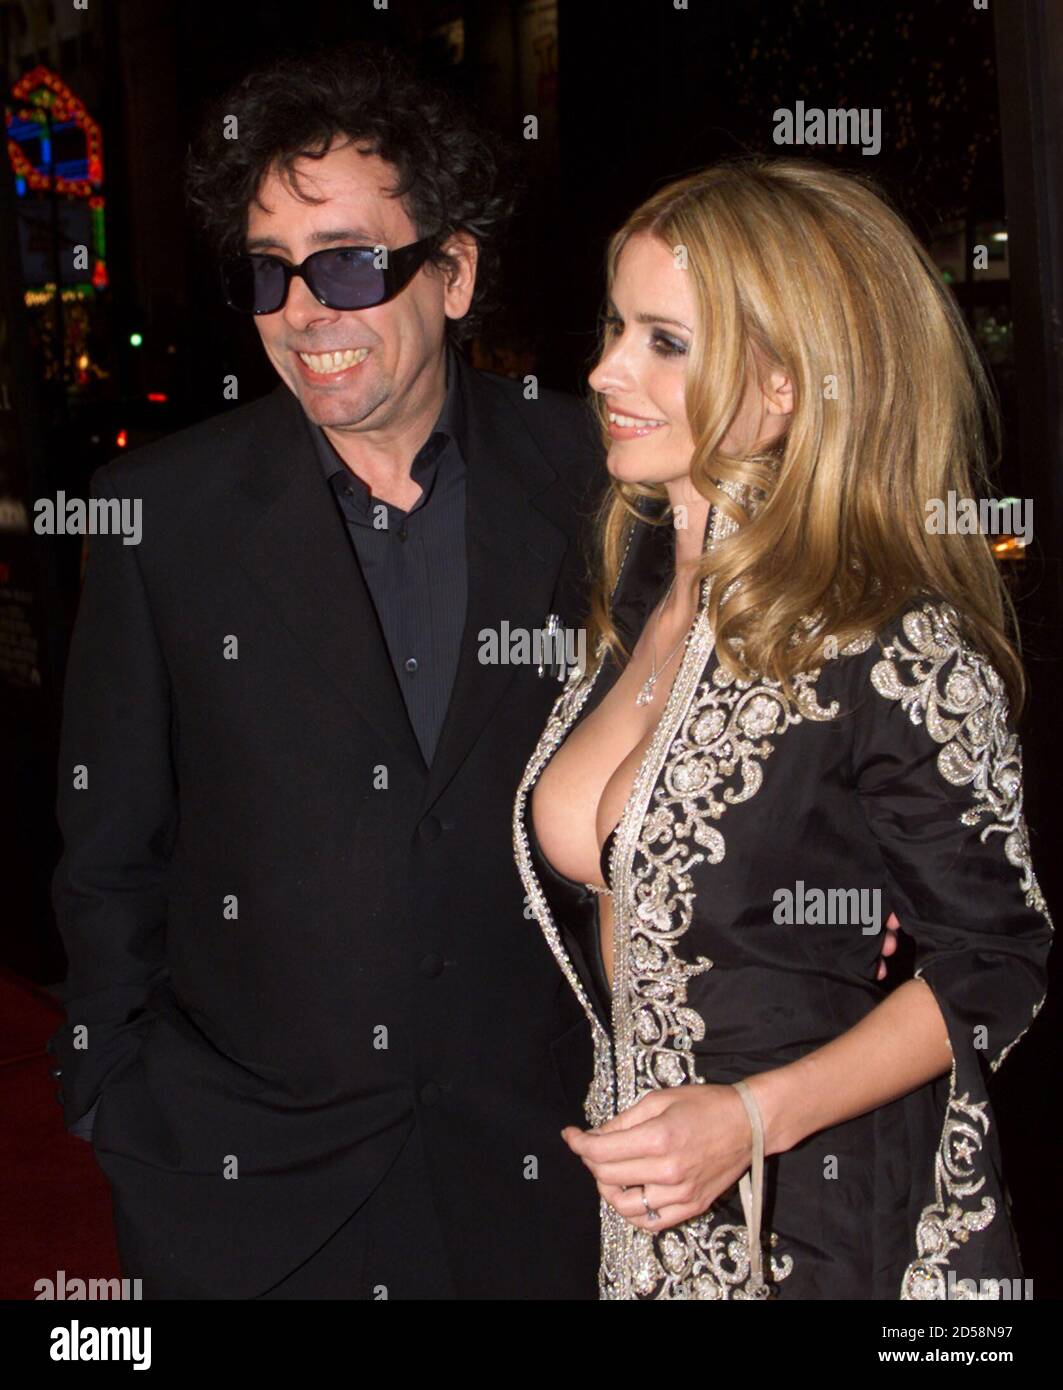 Director Tim Burton and girlfriend actress Lisa Marie arrive for the  premiere of Burton's new film " Sleepy Hollow" November 17 in Hollywood.  [Lisa Marie stars as Lady Crane in the film